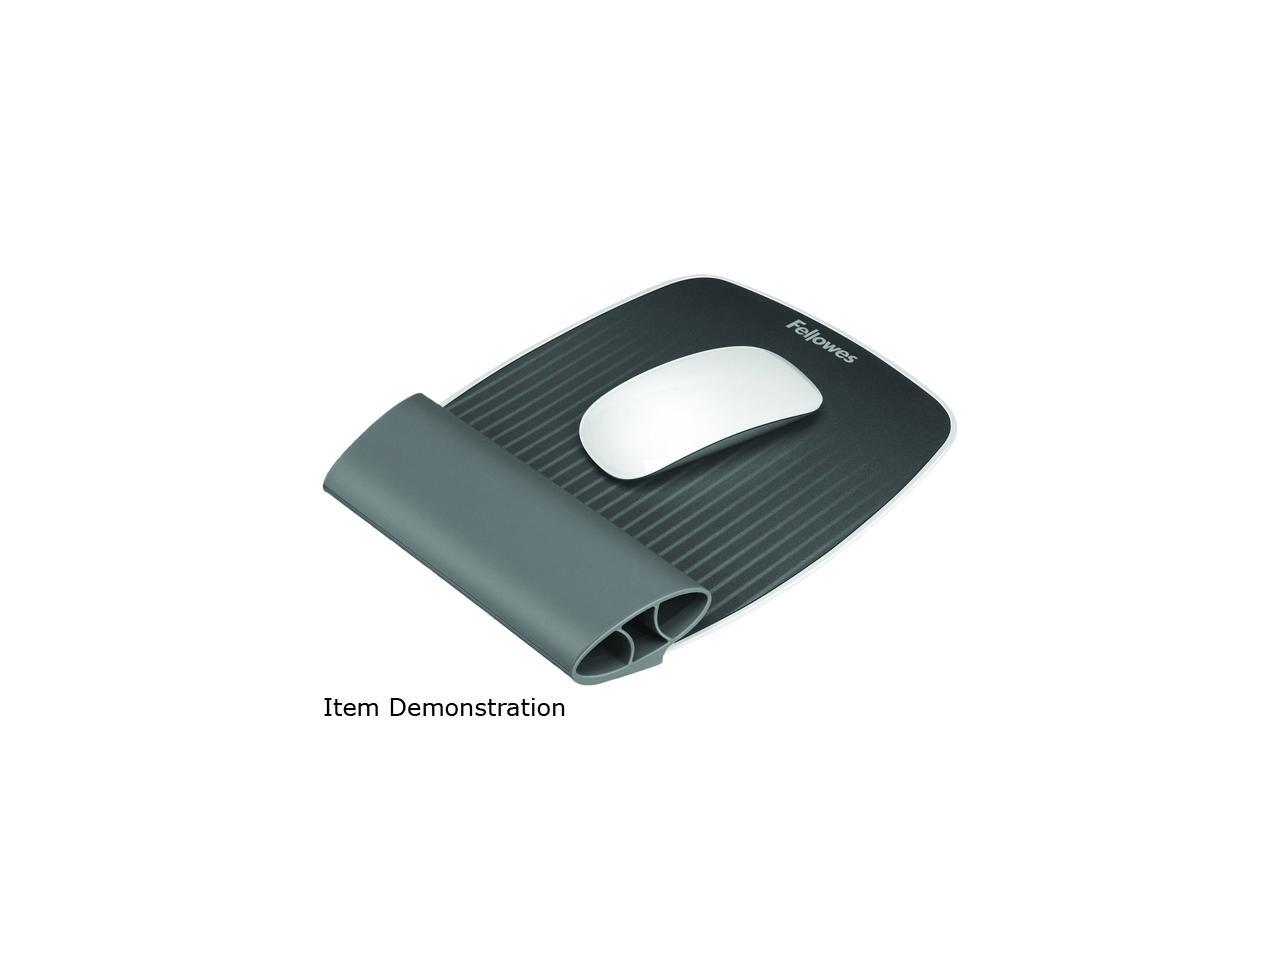 I-Spire Wrist Rocker Mouse Pad with Wrist Rest 7.81" x 10", Gray - image 1 of 5